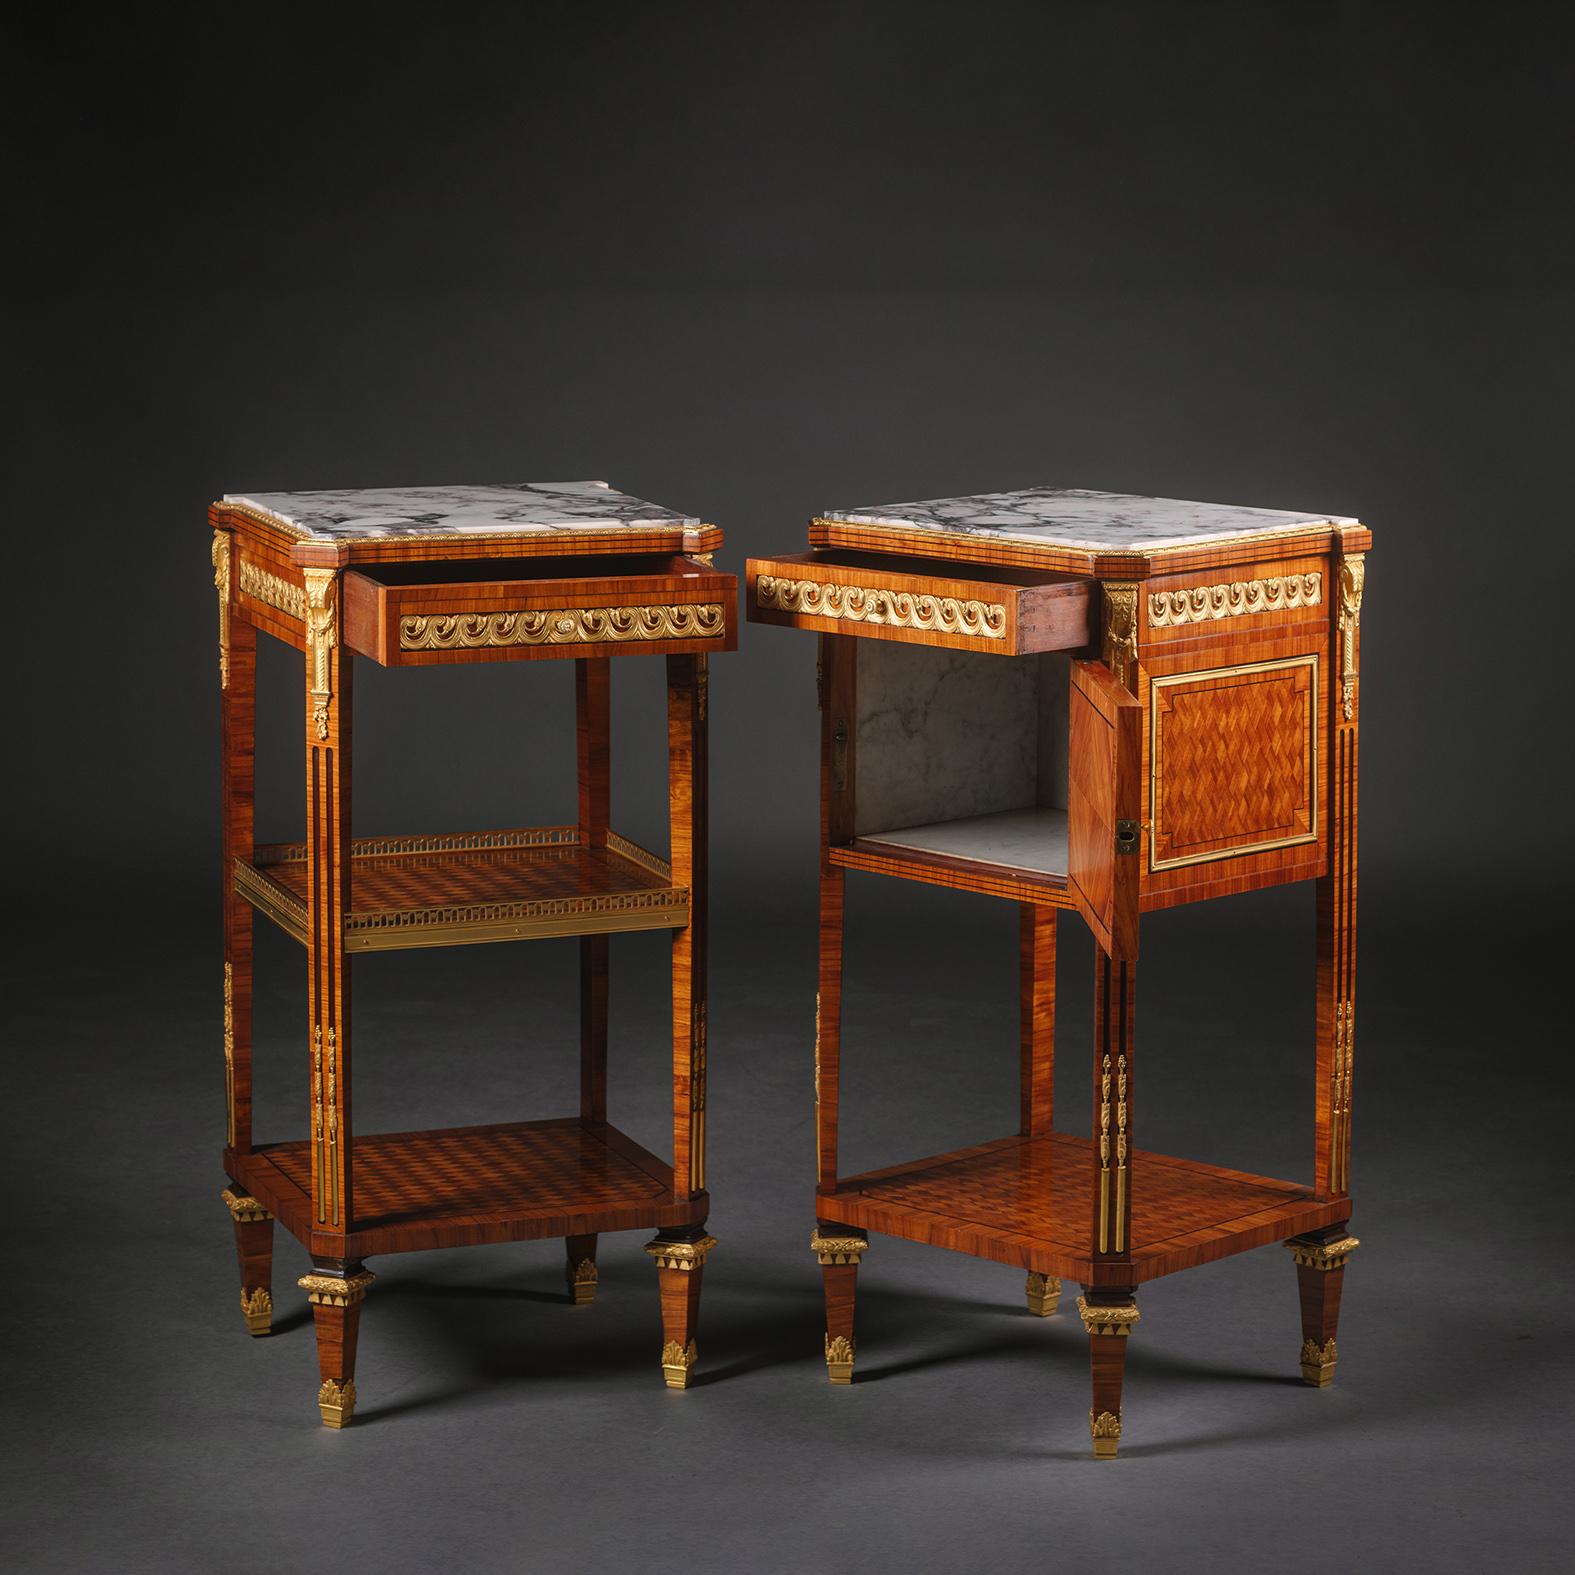 Pair of Louis XVI Style Gilt-Bronze Mounted Parquetry beside Tables In Good Condition For Sale In Brighton, West Sussex